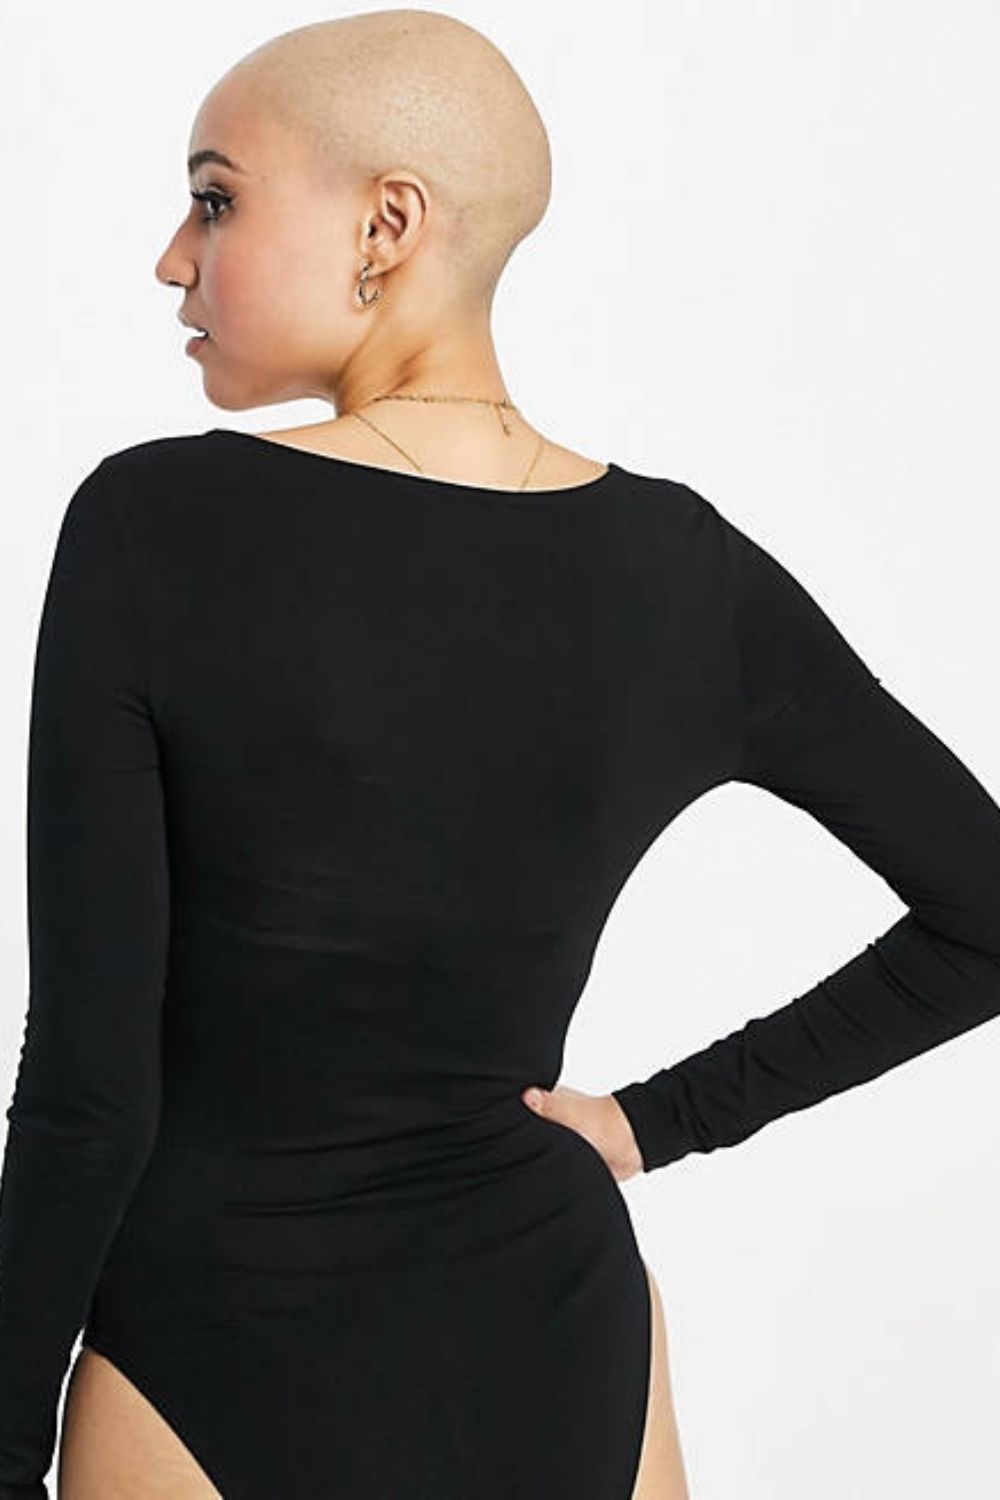 Bodysuit Scoop Neck Black Top – Styched Fashion